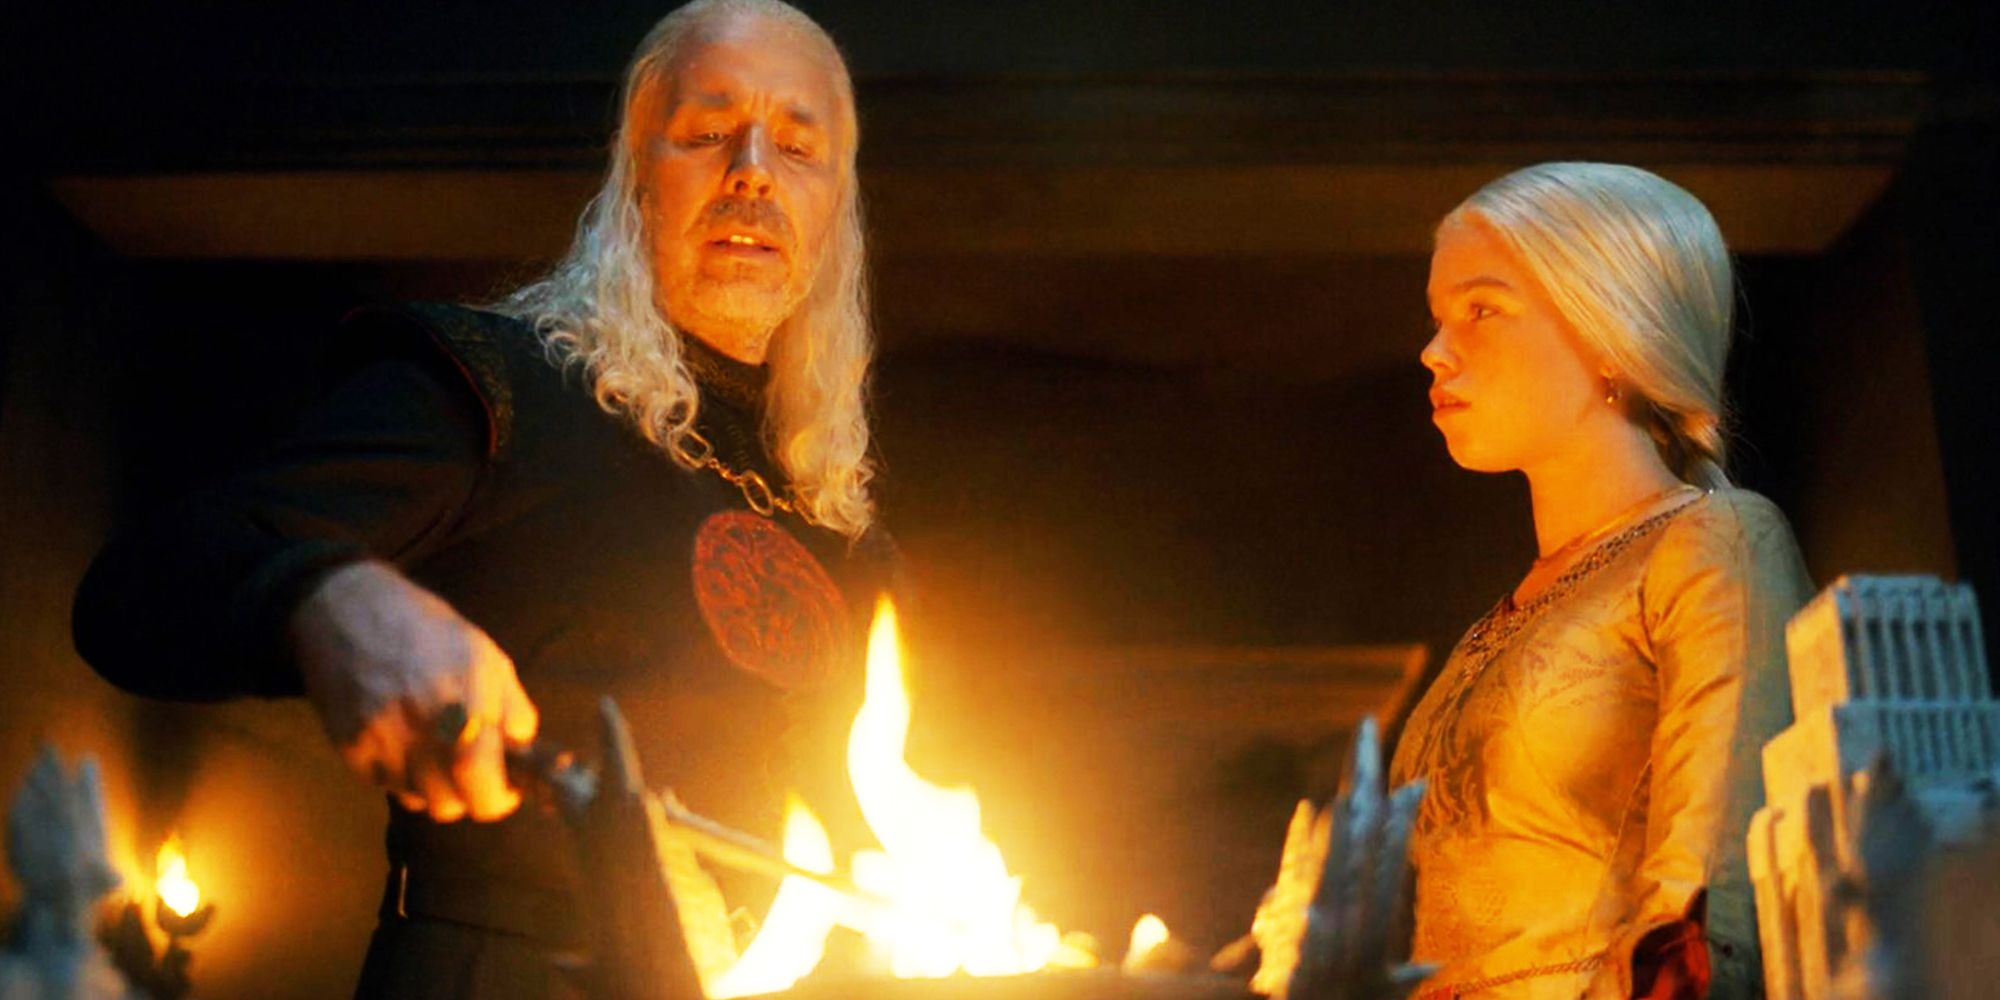 Viserys holding the catspaw dagger over a flame and revealing Aegon's dream to Rhaenyra in House of the Dragon